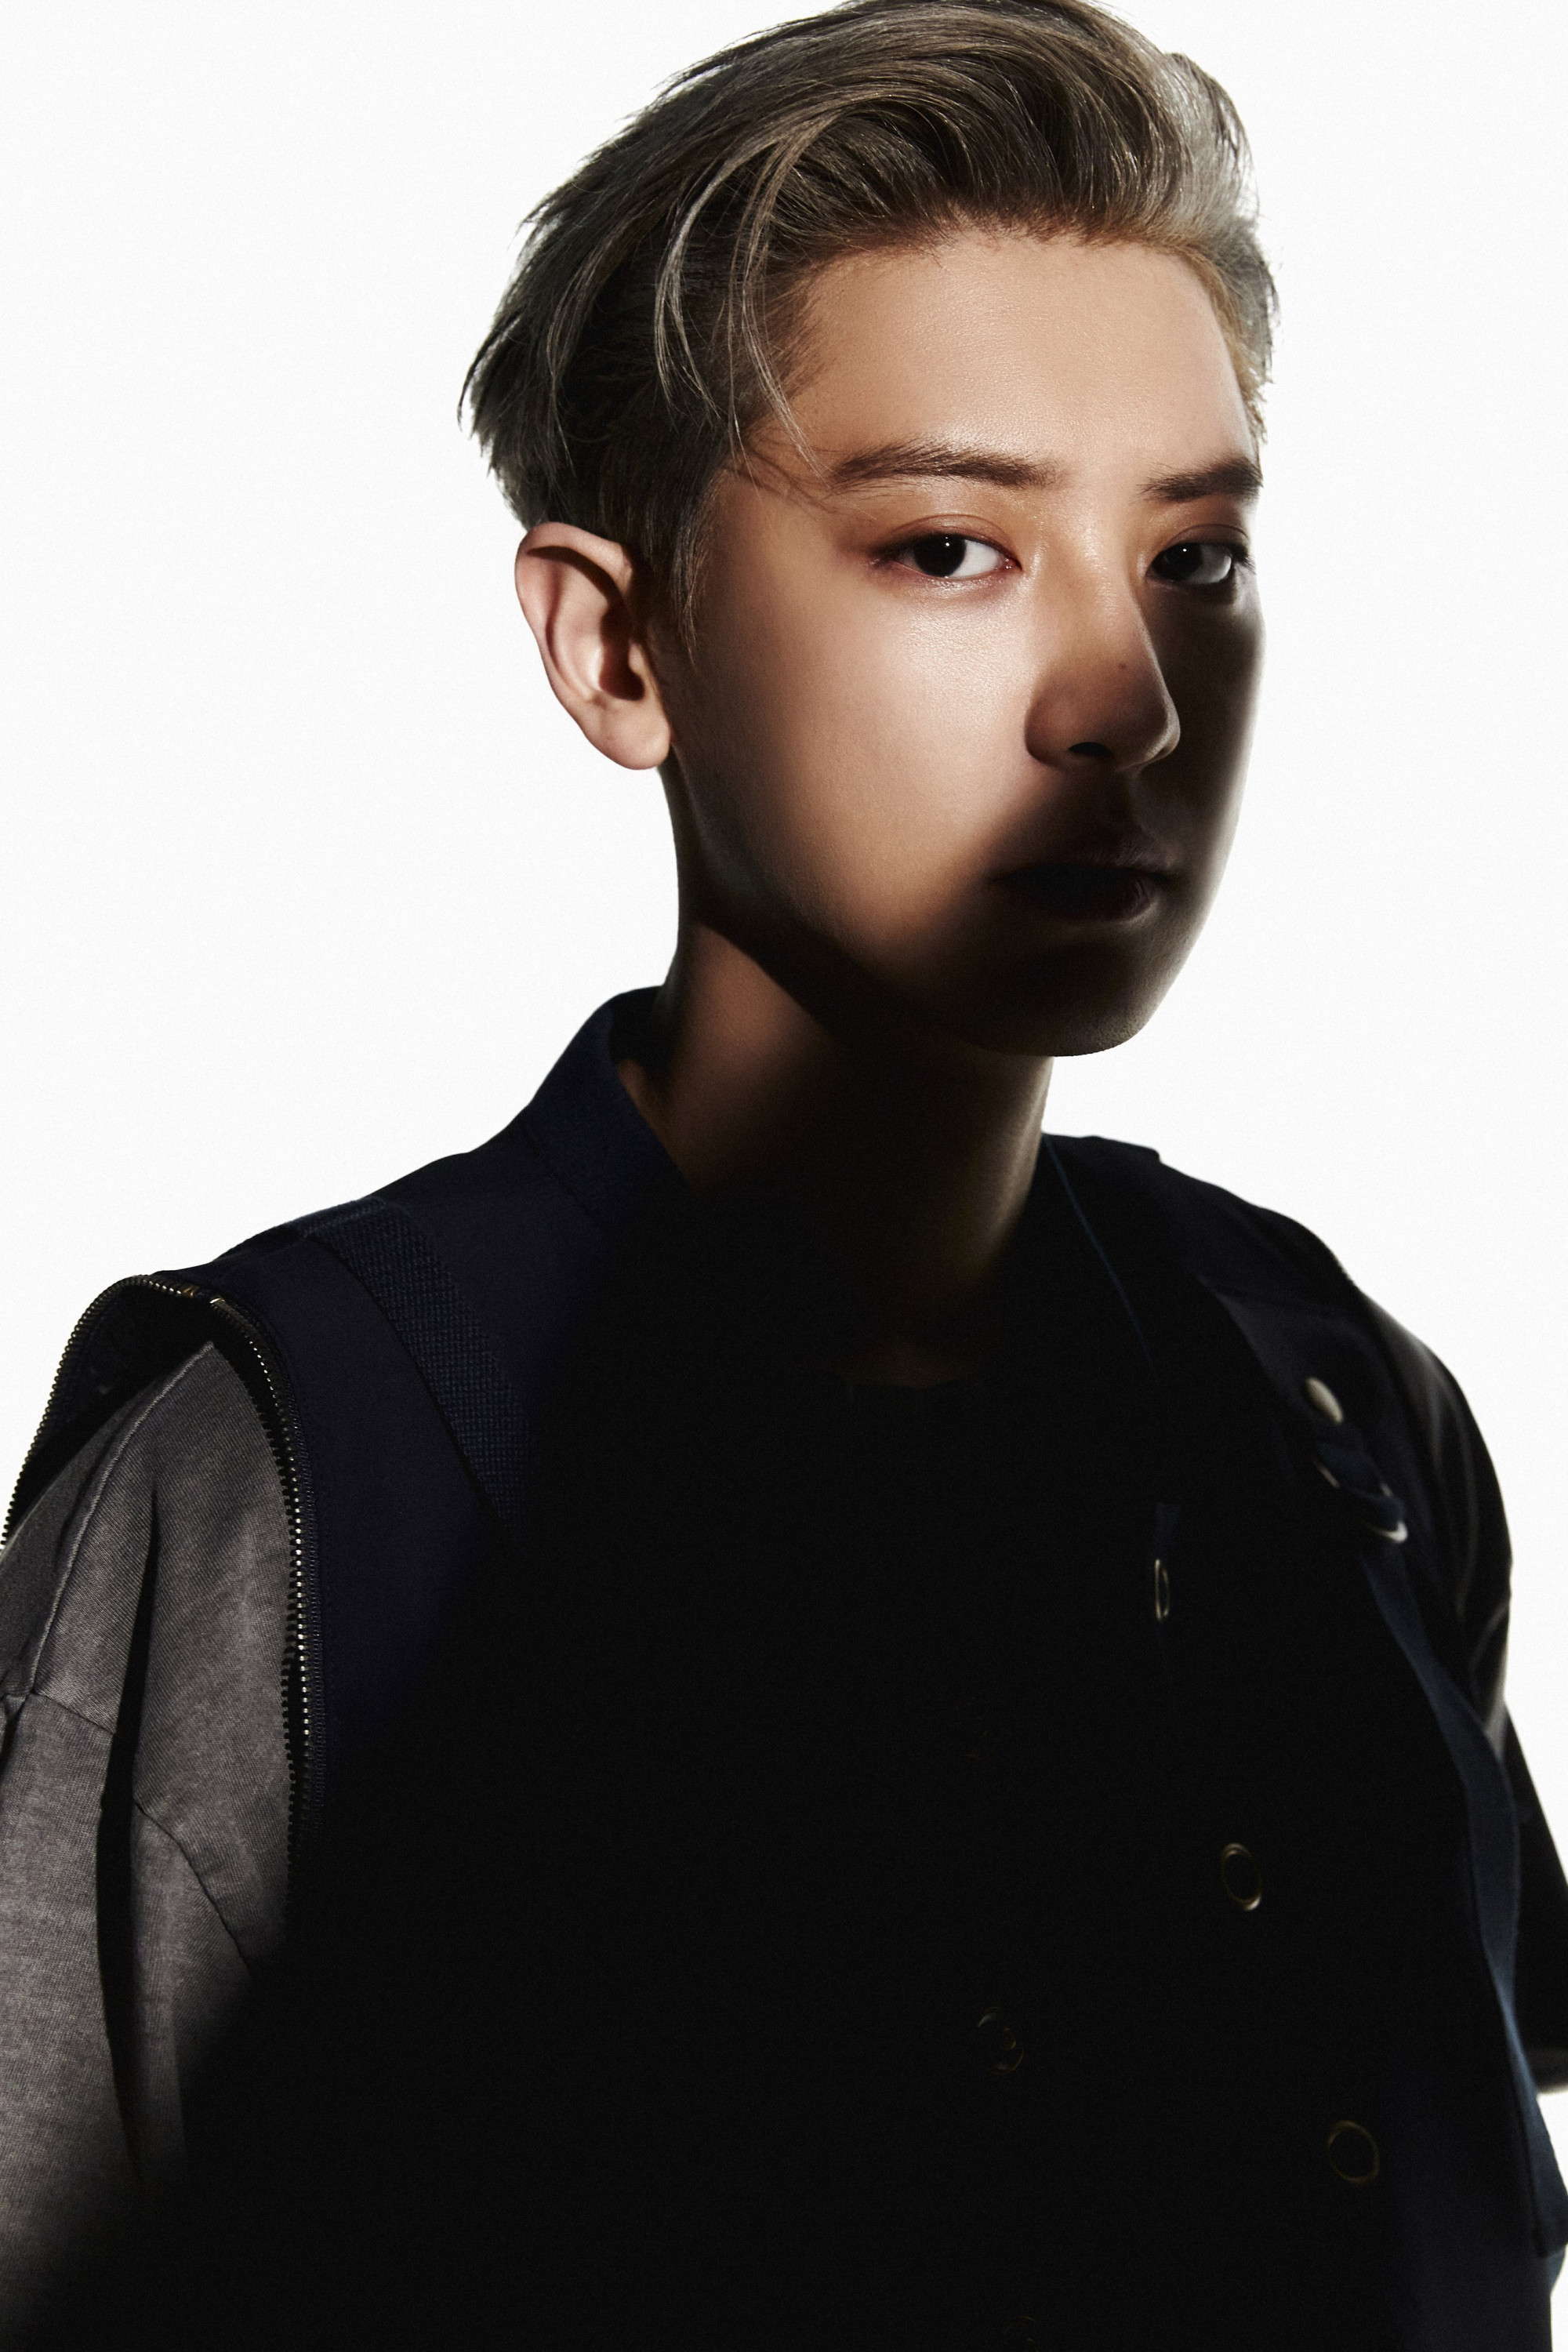 EXO Chanyeol "Eclipse" Teasers [Don't Fight The Feeling]